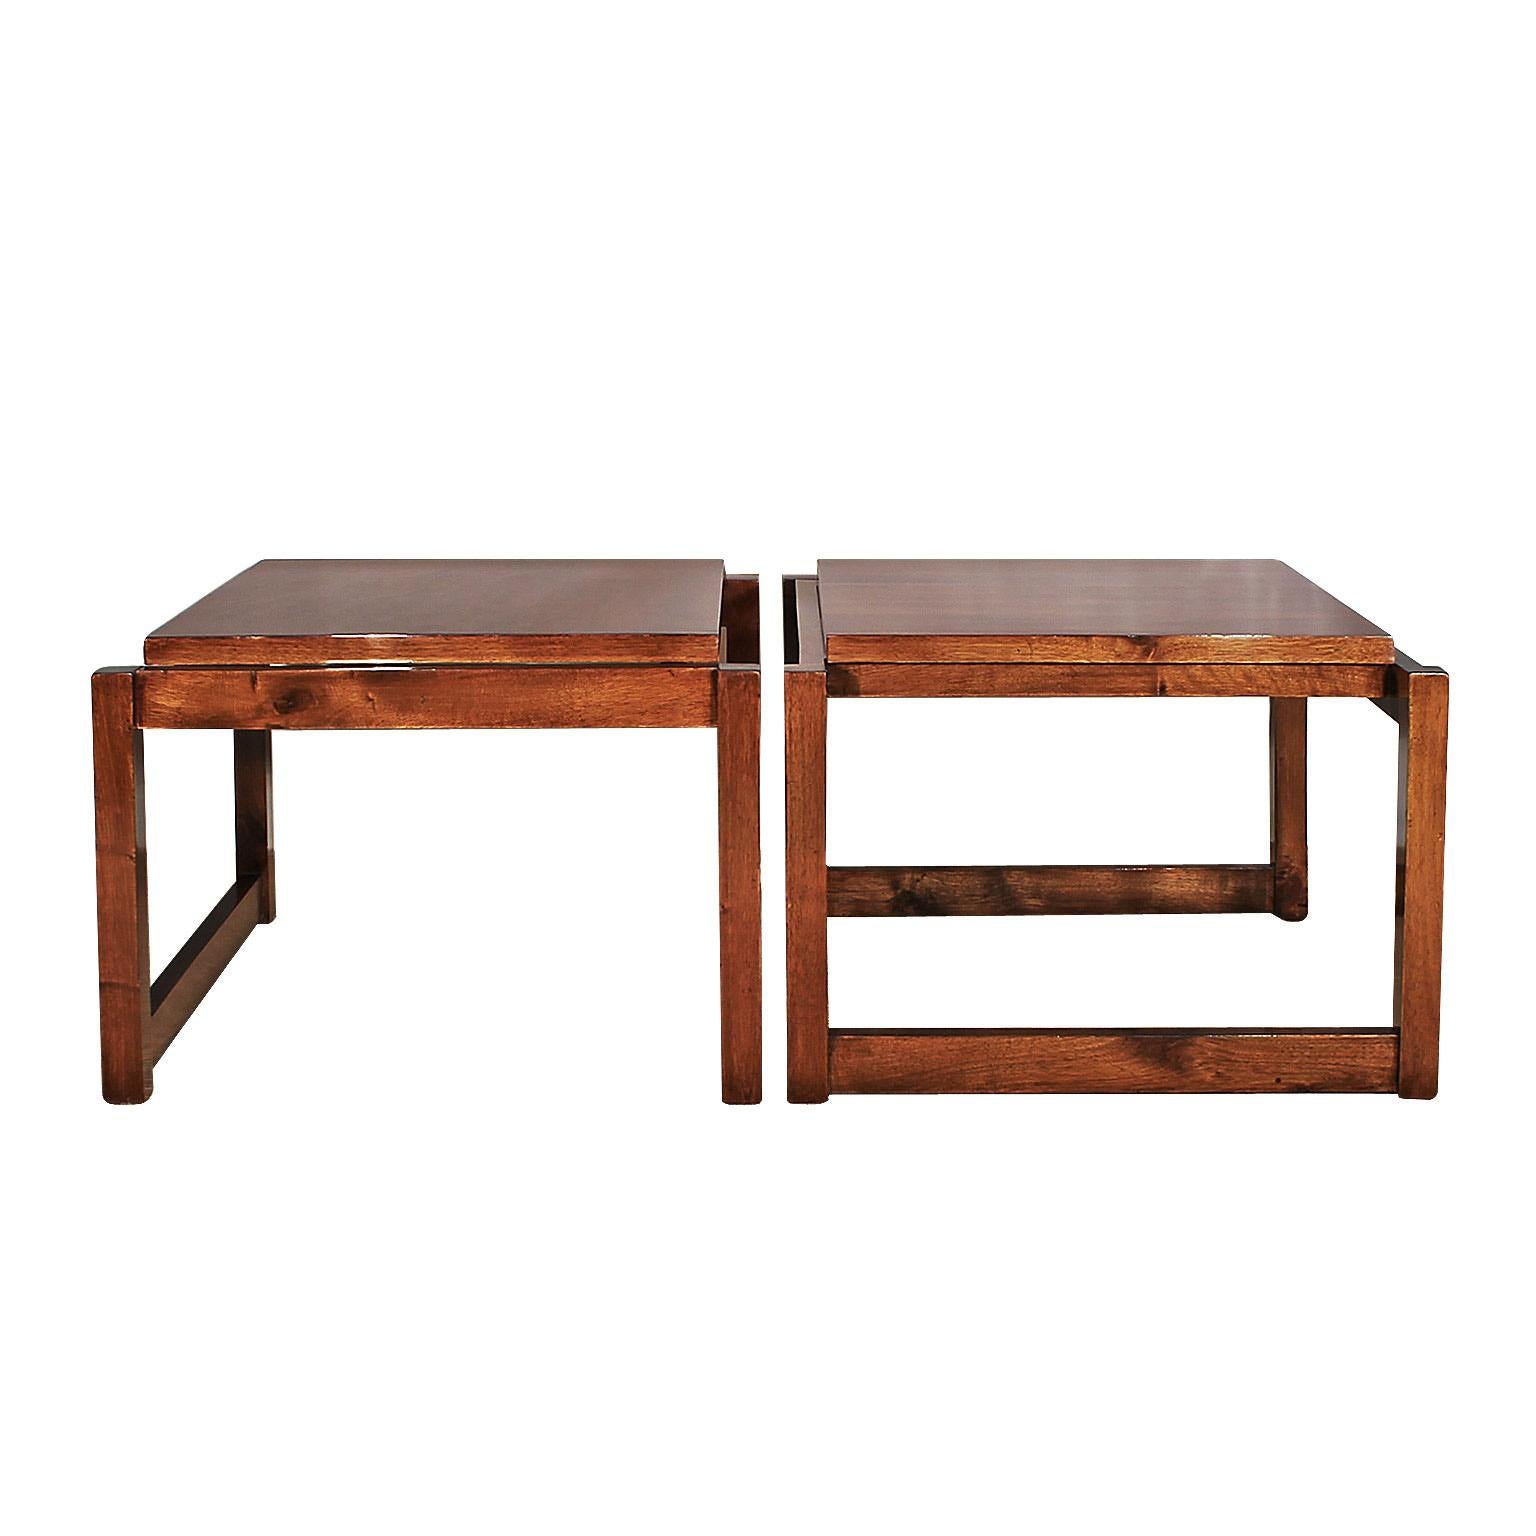 Pair of Cubist style coffee tables, solid walnut and walnut veneer, French polish.
France, 1960-1970.